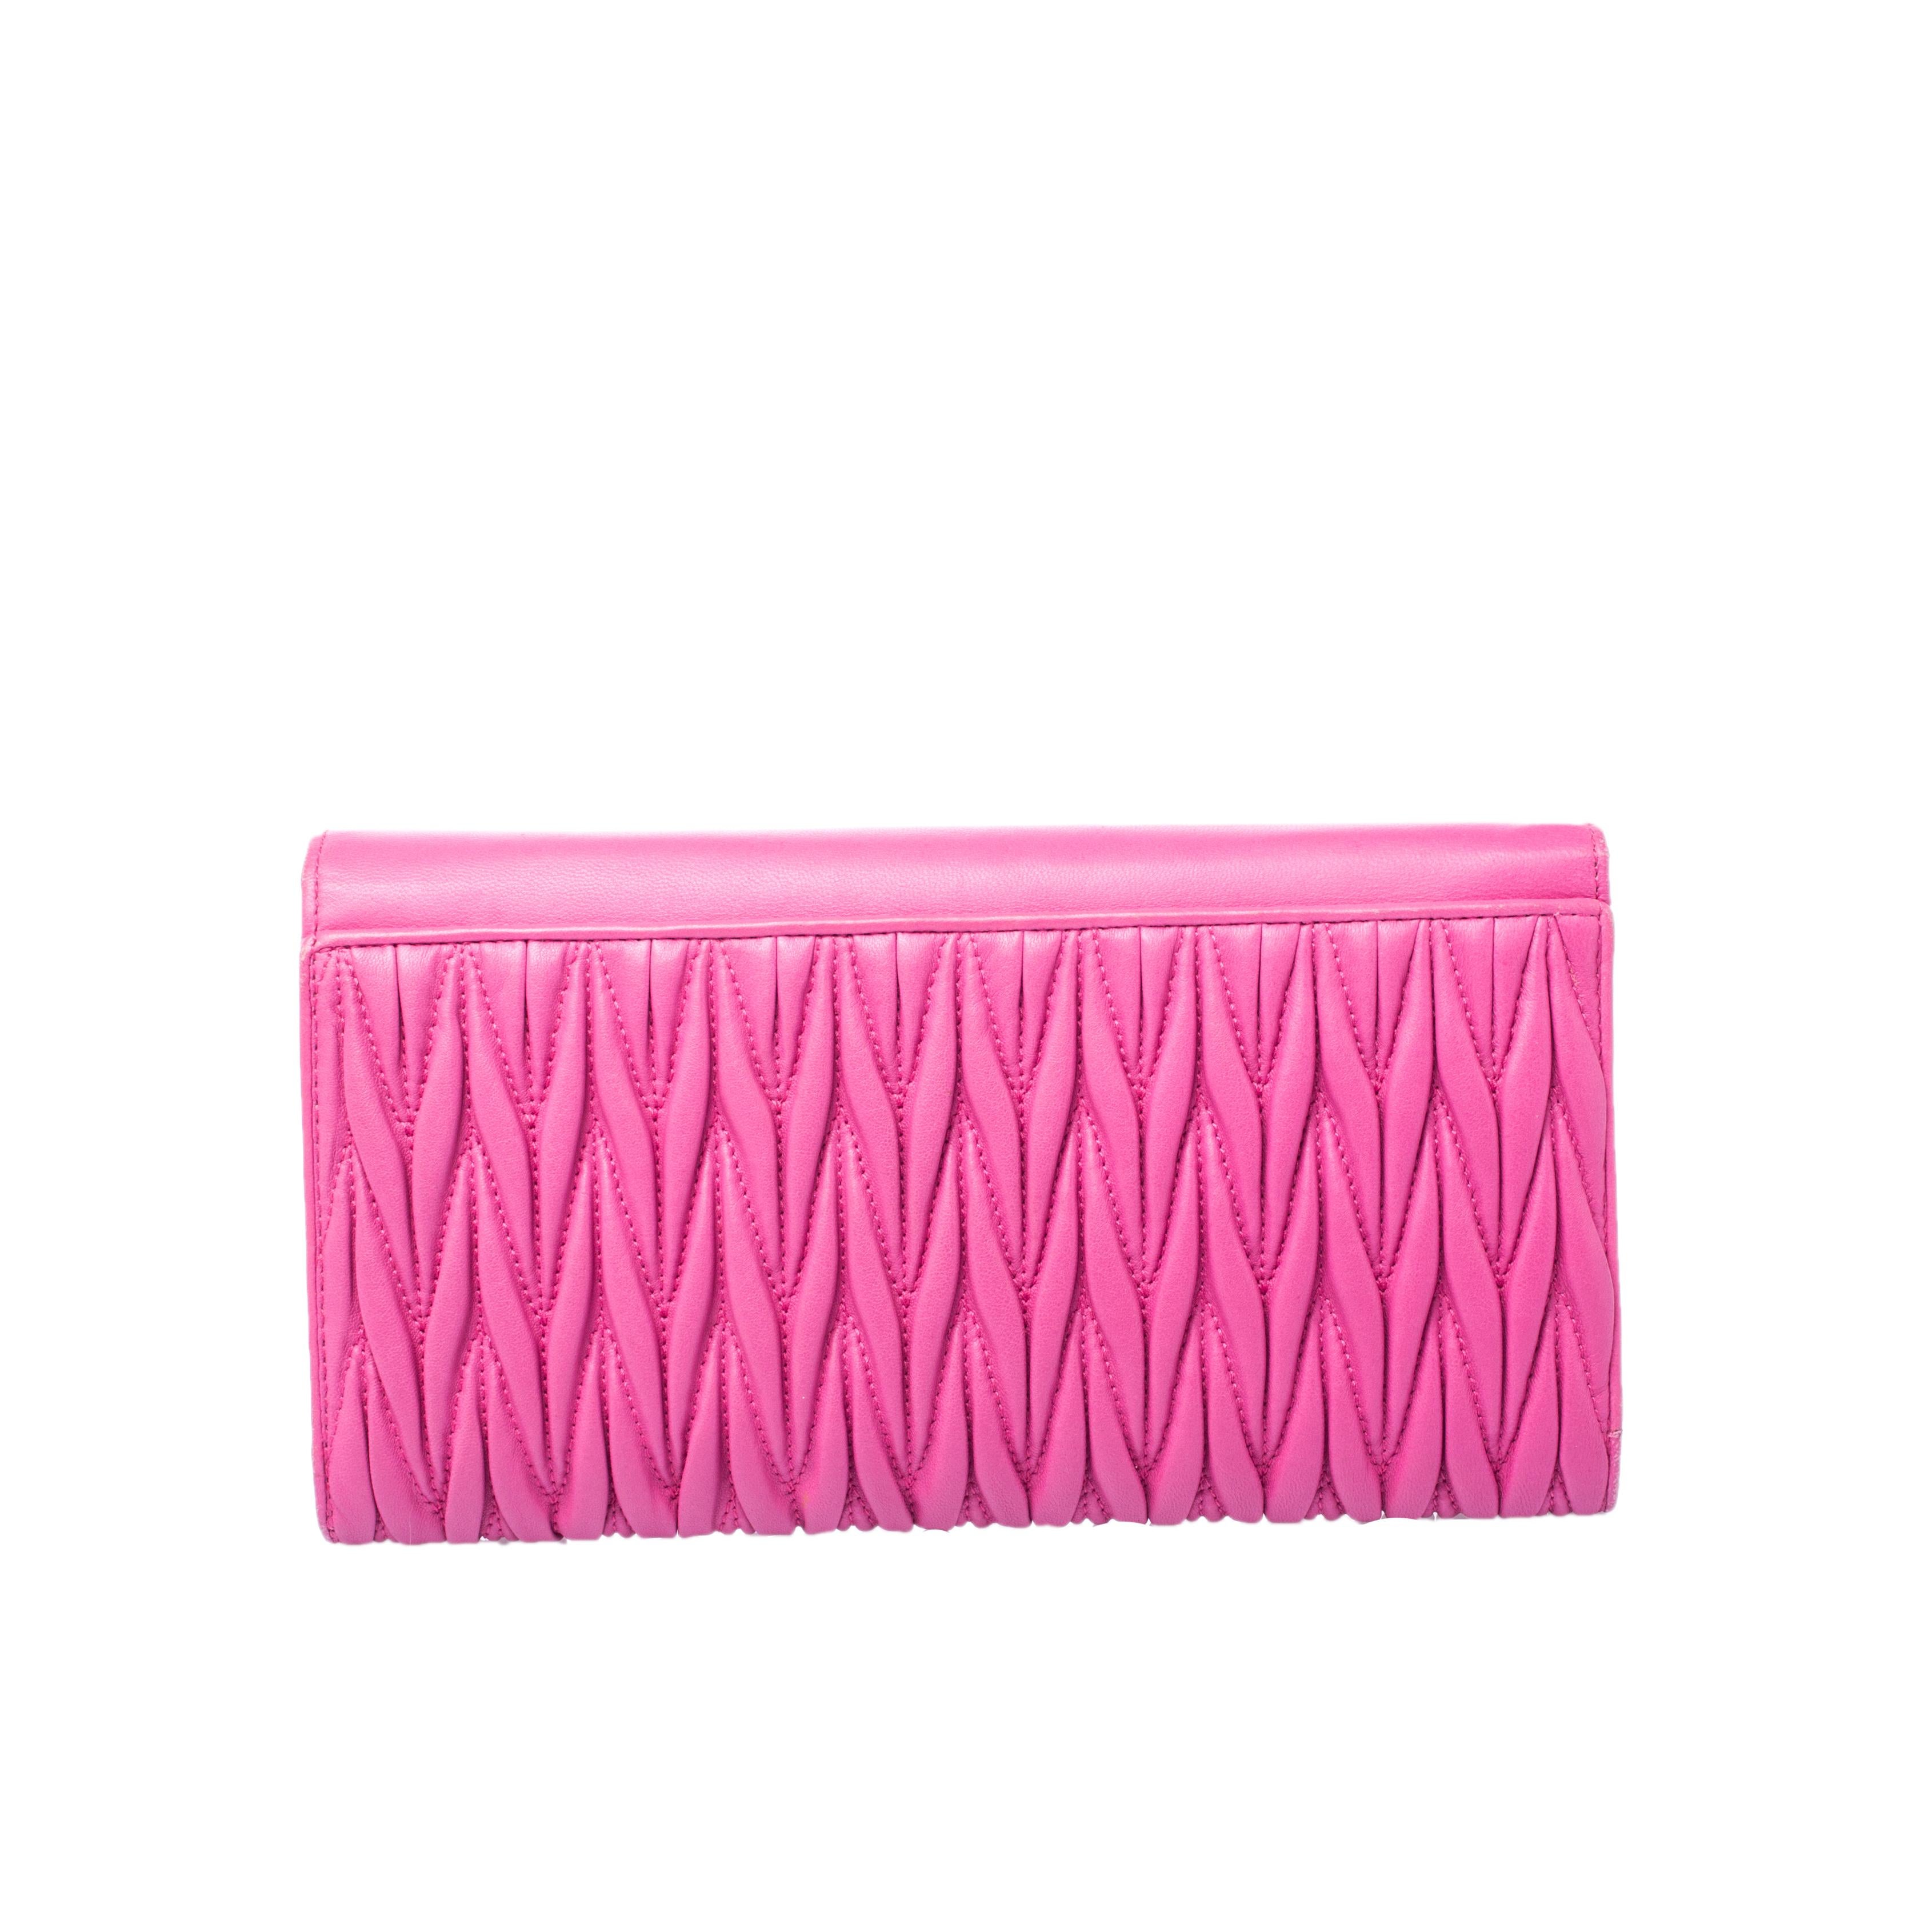 With classic matelassé leather, this clutch from Miu Miu comes in a structured shape flaunting a pretty pink hue. The smooth front flap opens to a leather-lined interiors housing multiple card slots and open compartments. The signature brand name